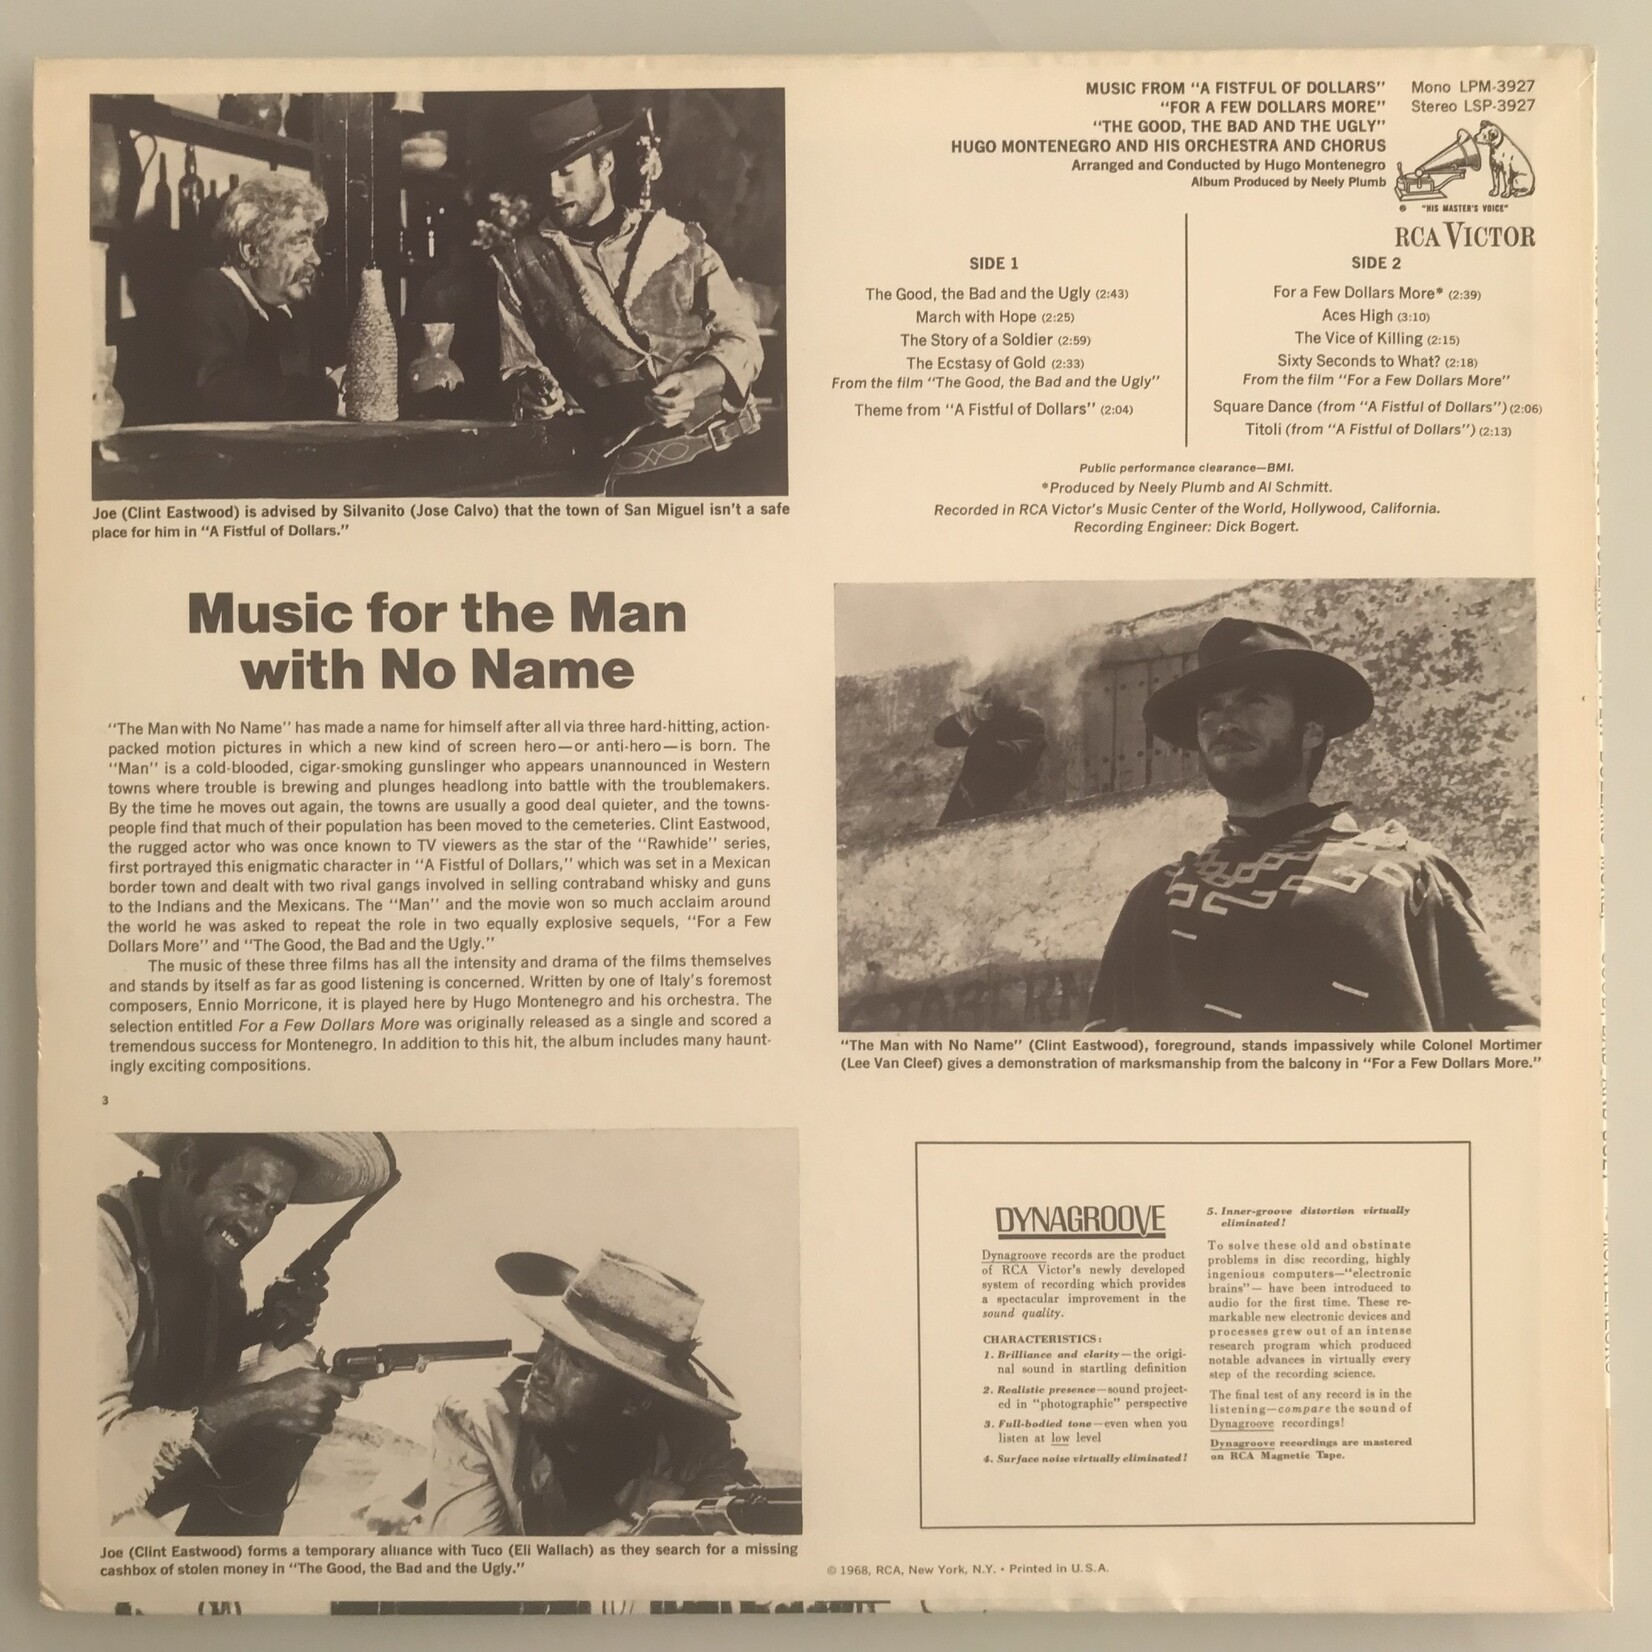 Hugo Montenegro - Music From “A Fistful Of Dollars” & “For A Few Dollars More” & “The Good, The Bad And The Ugly” - Vinyl LP (USED)